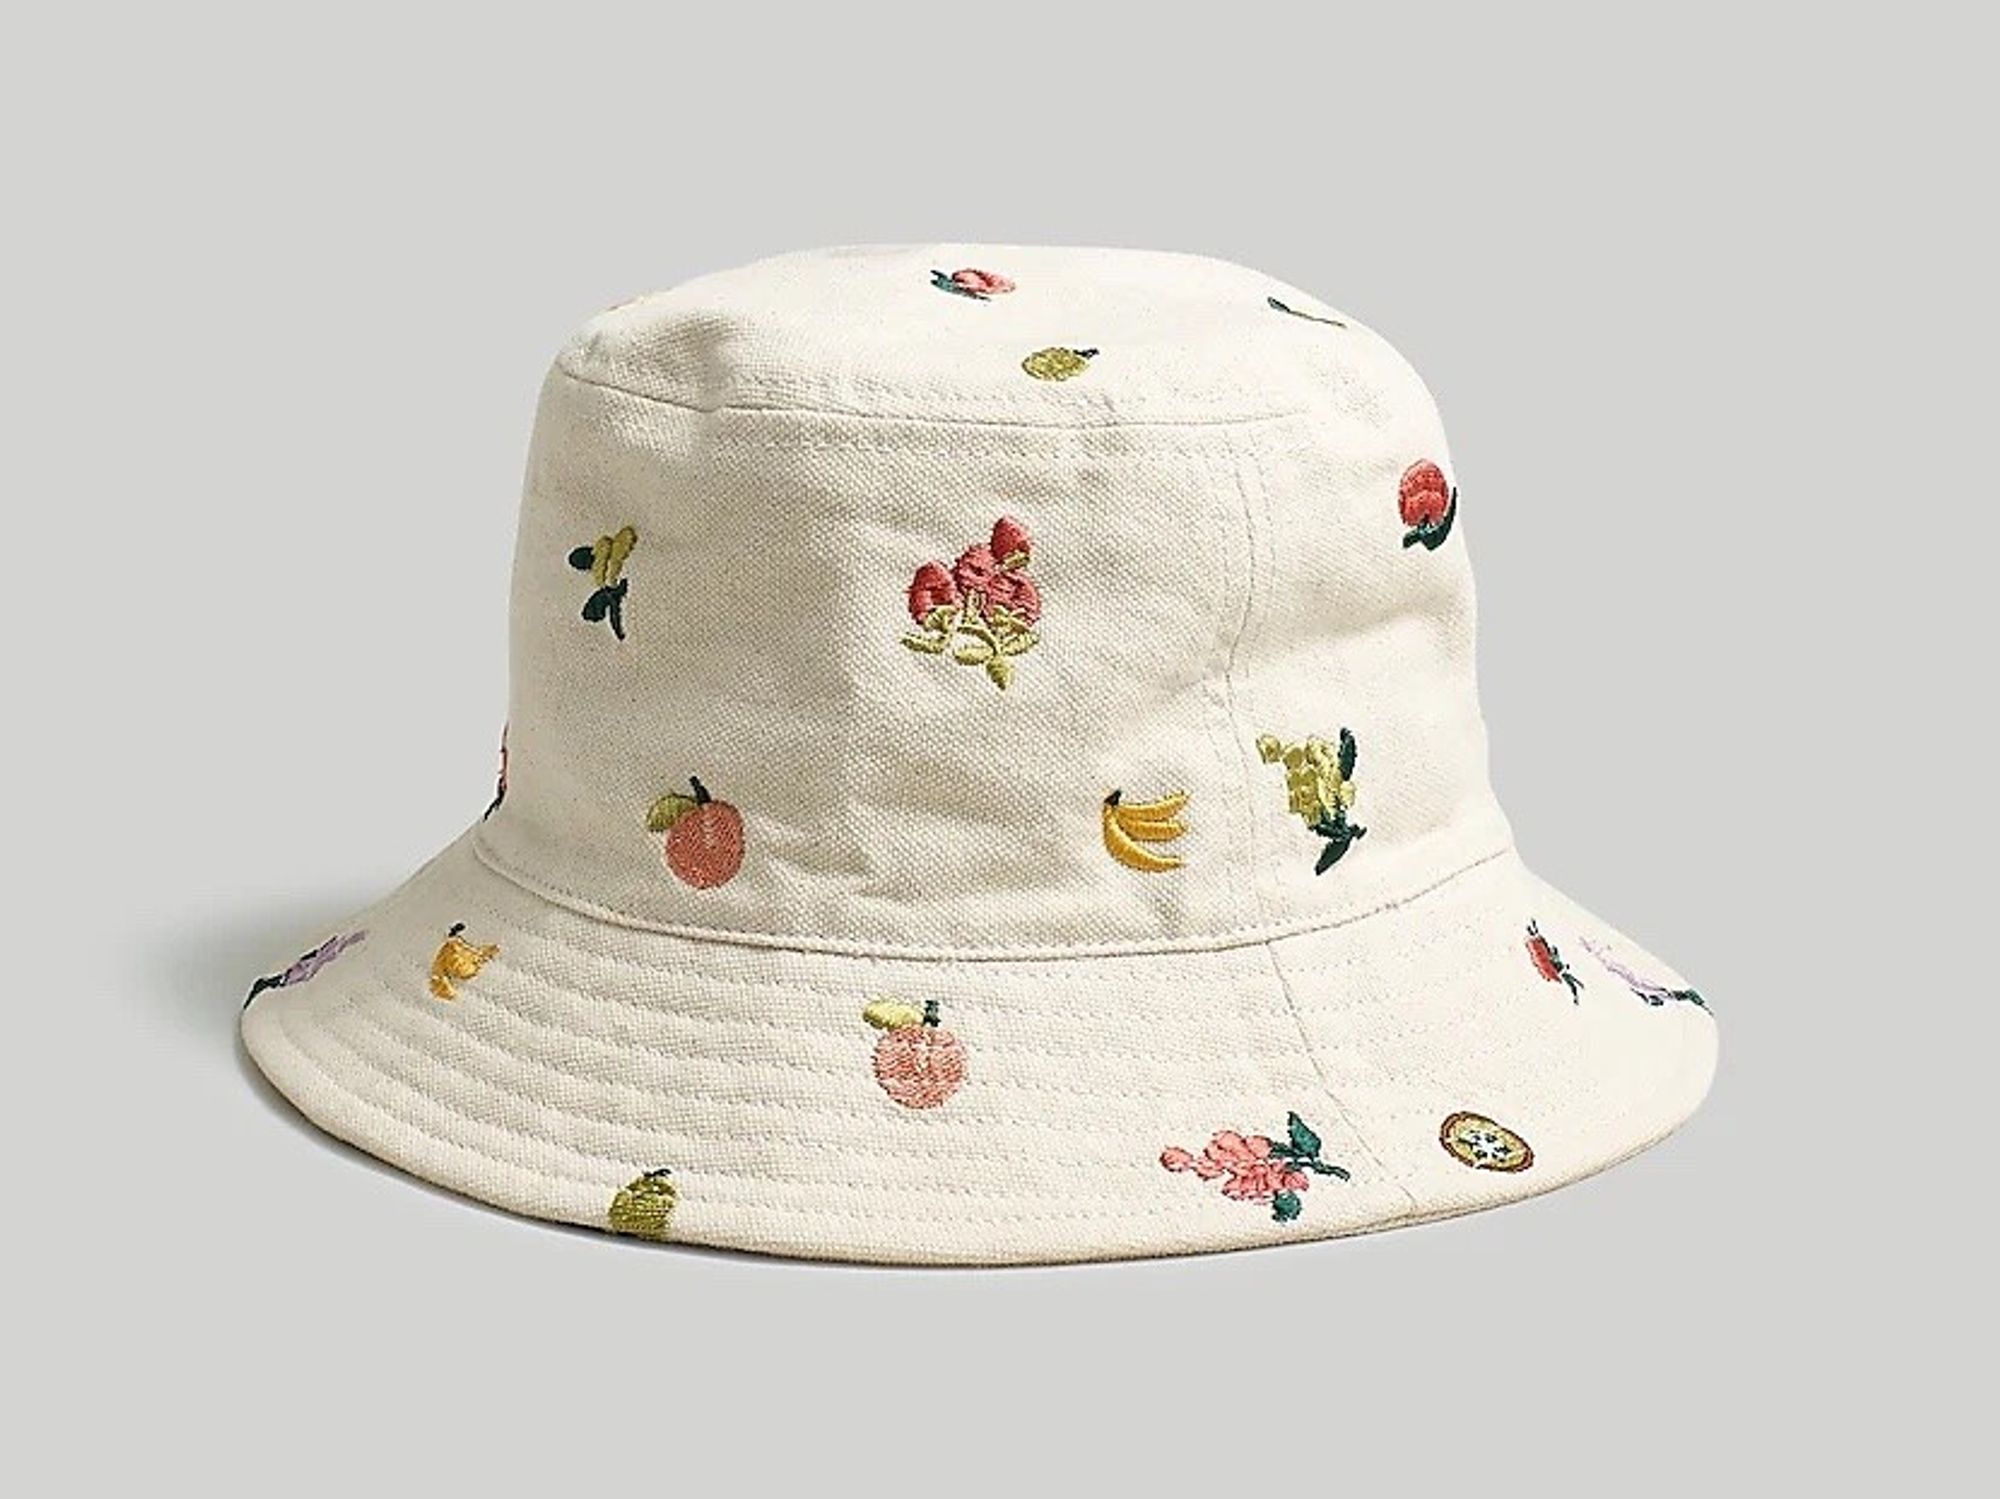 17 Summer Hats That Bring Both Shade And Style - Brit + Co